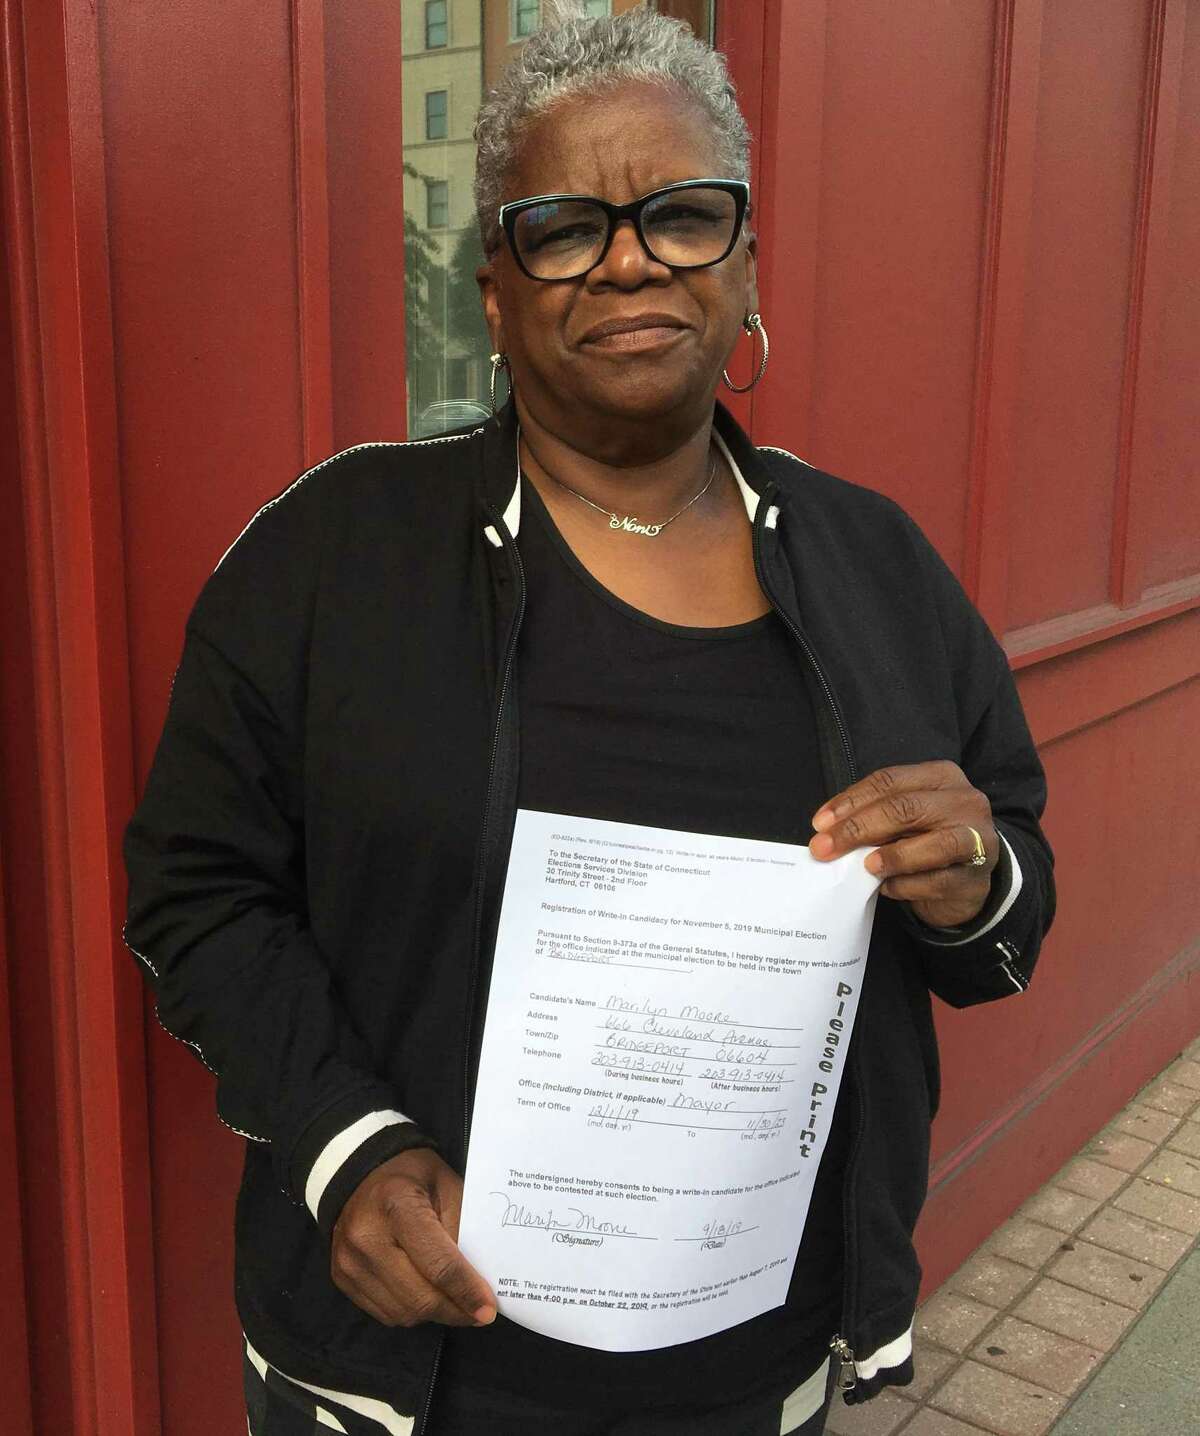 Marilyn Moore’s write-in document that was delivered Wednesday to the Secretary of the State.